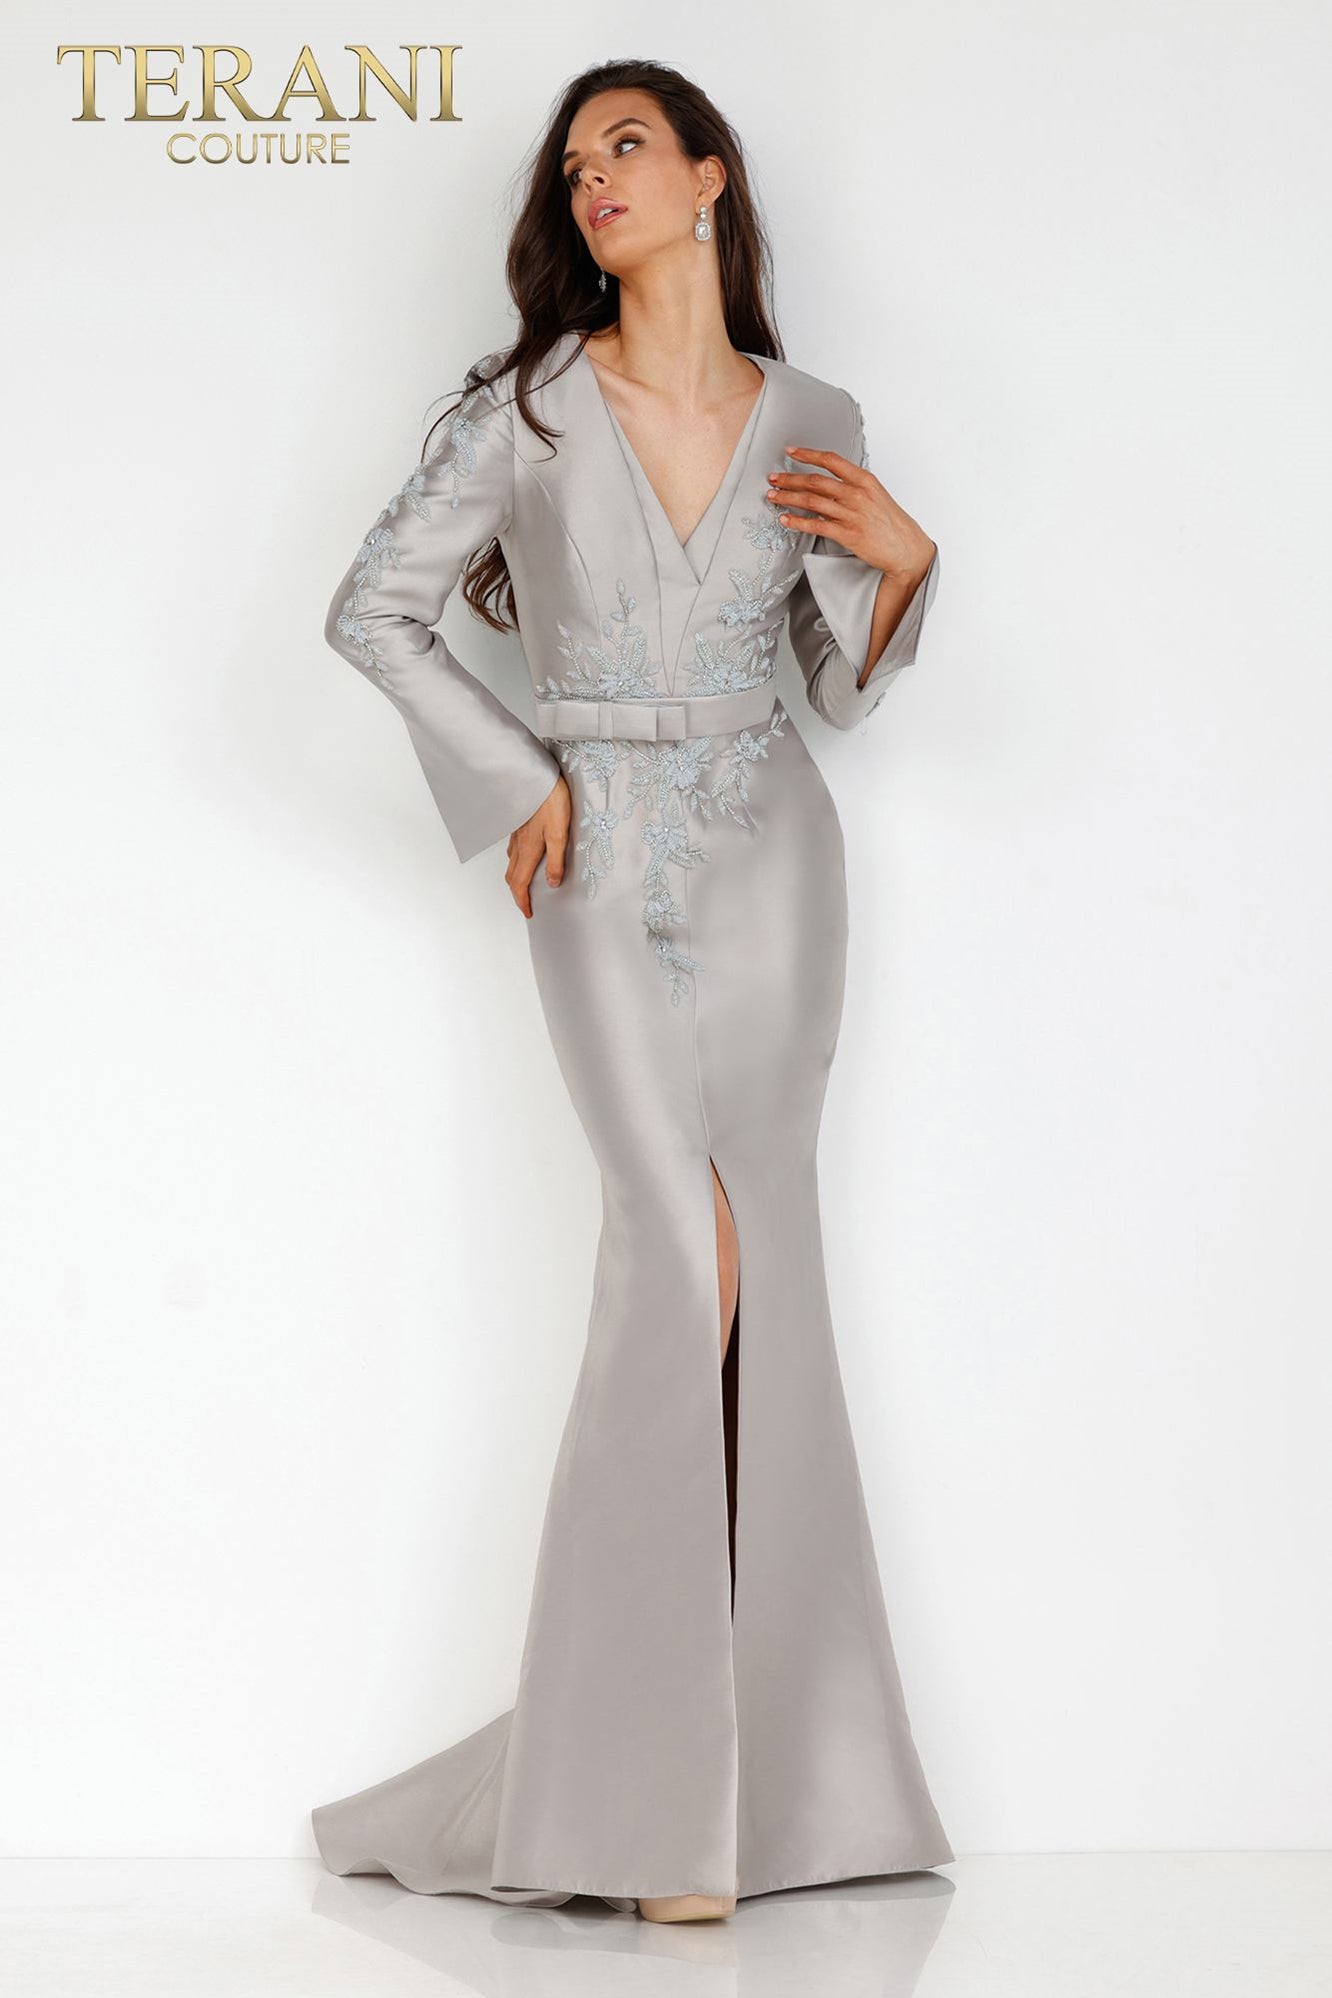 Mother of the Bride Dresses & Gowns - Terani Couture